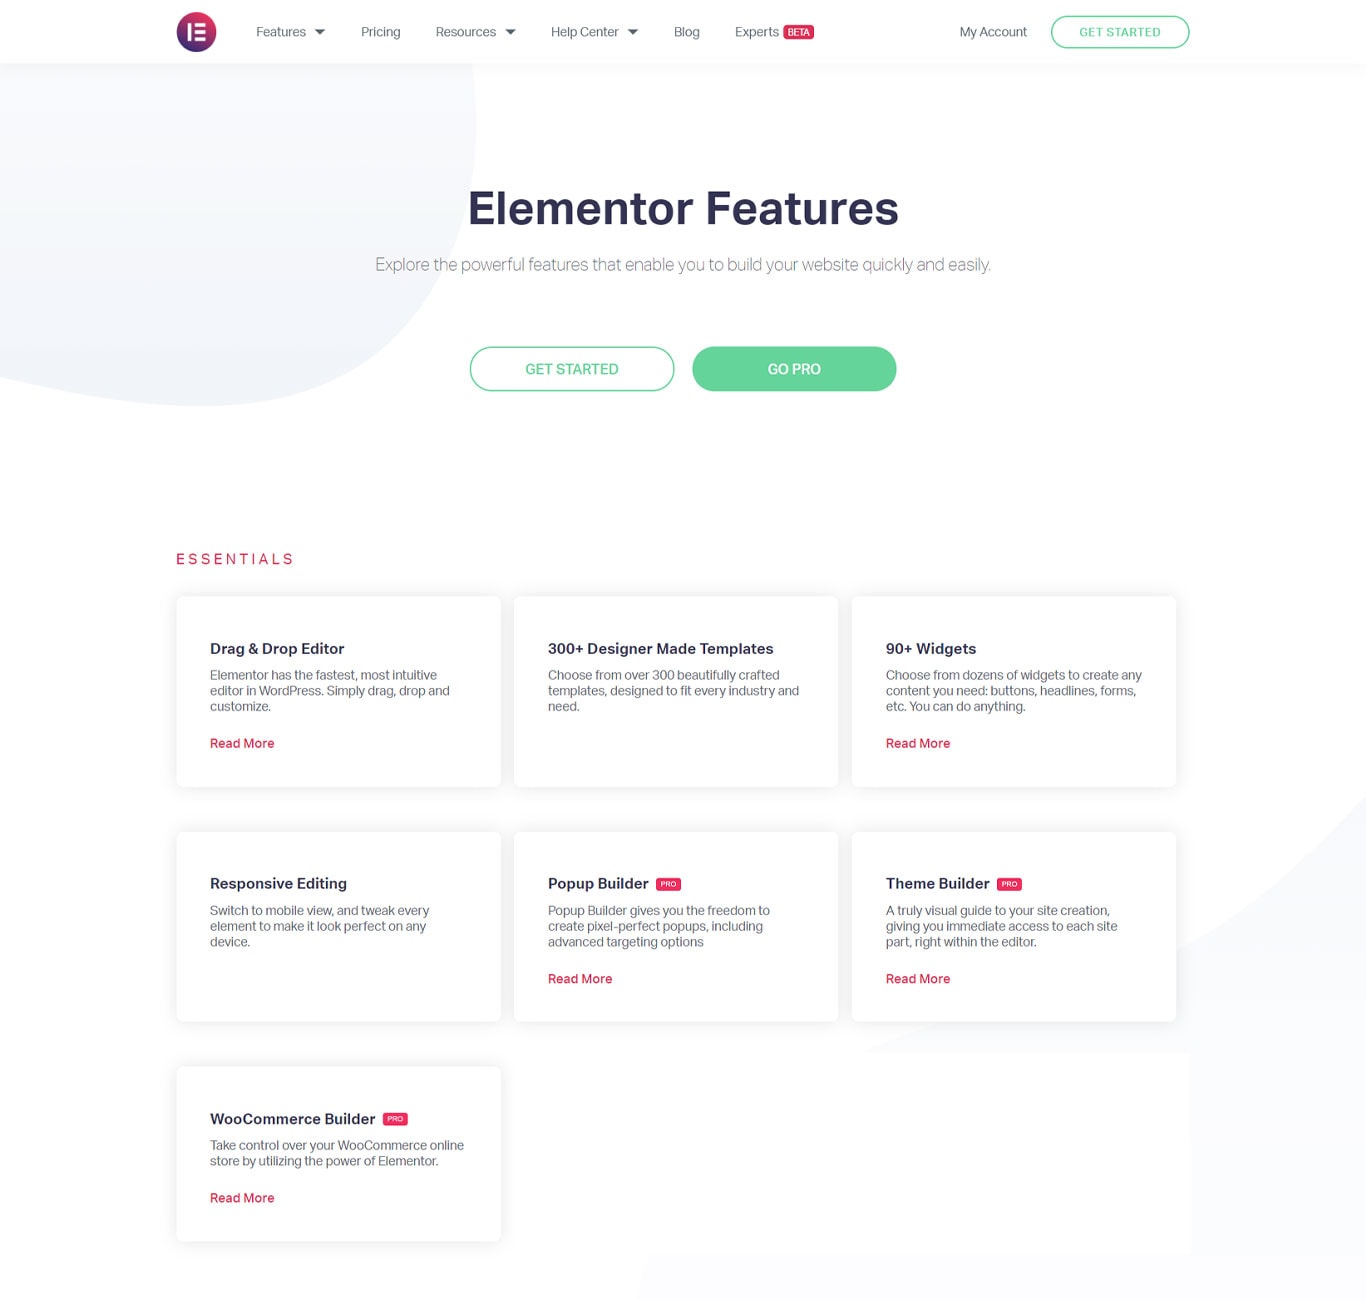 Elementor features image